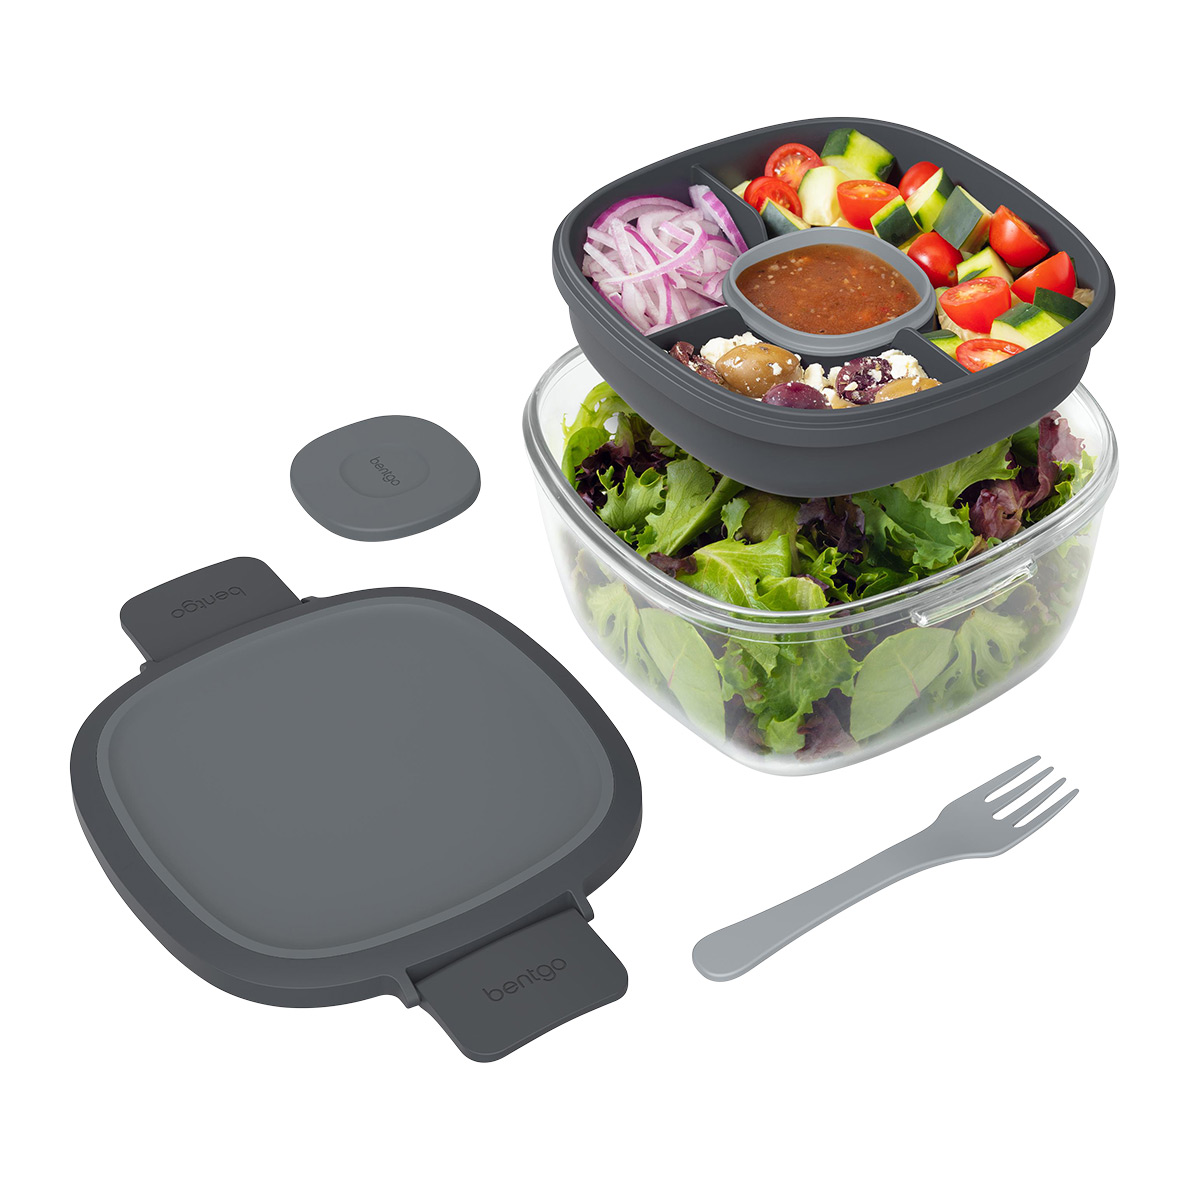 https://www.containerstore.com/catalogimages/478580/10092899-bentgo-glass-salad-containe.jpg